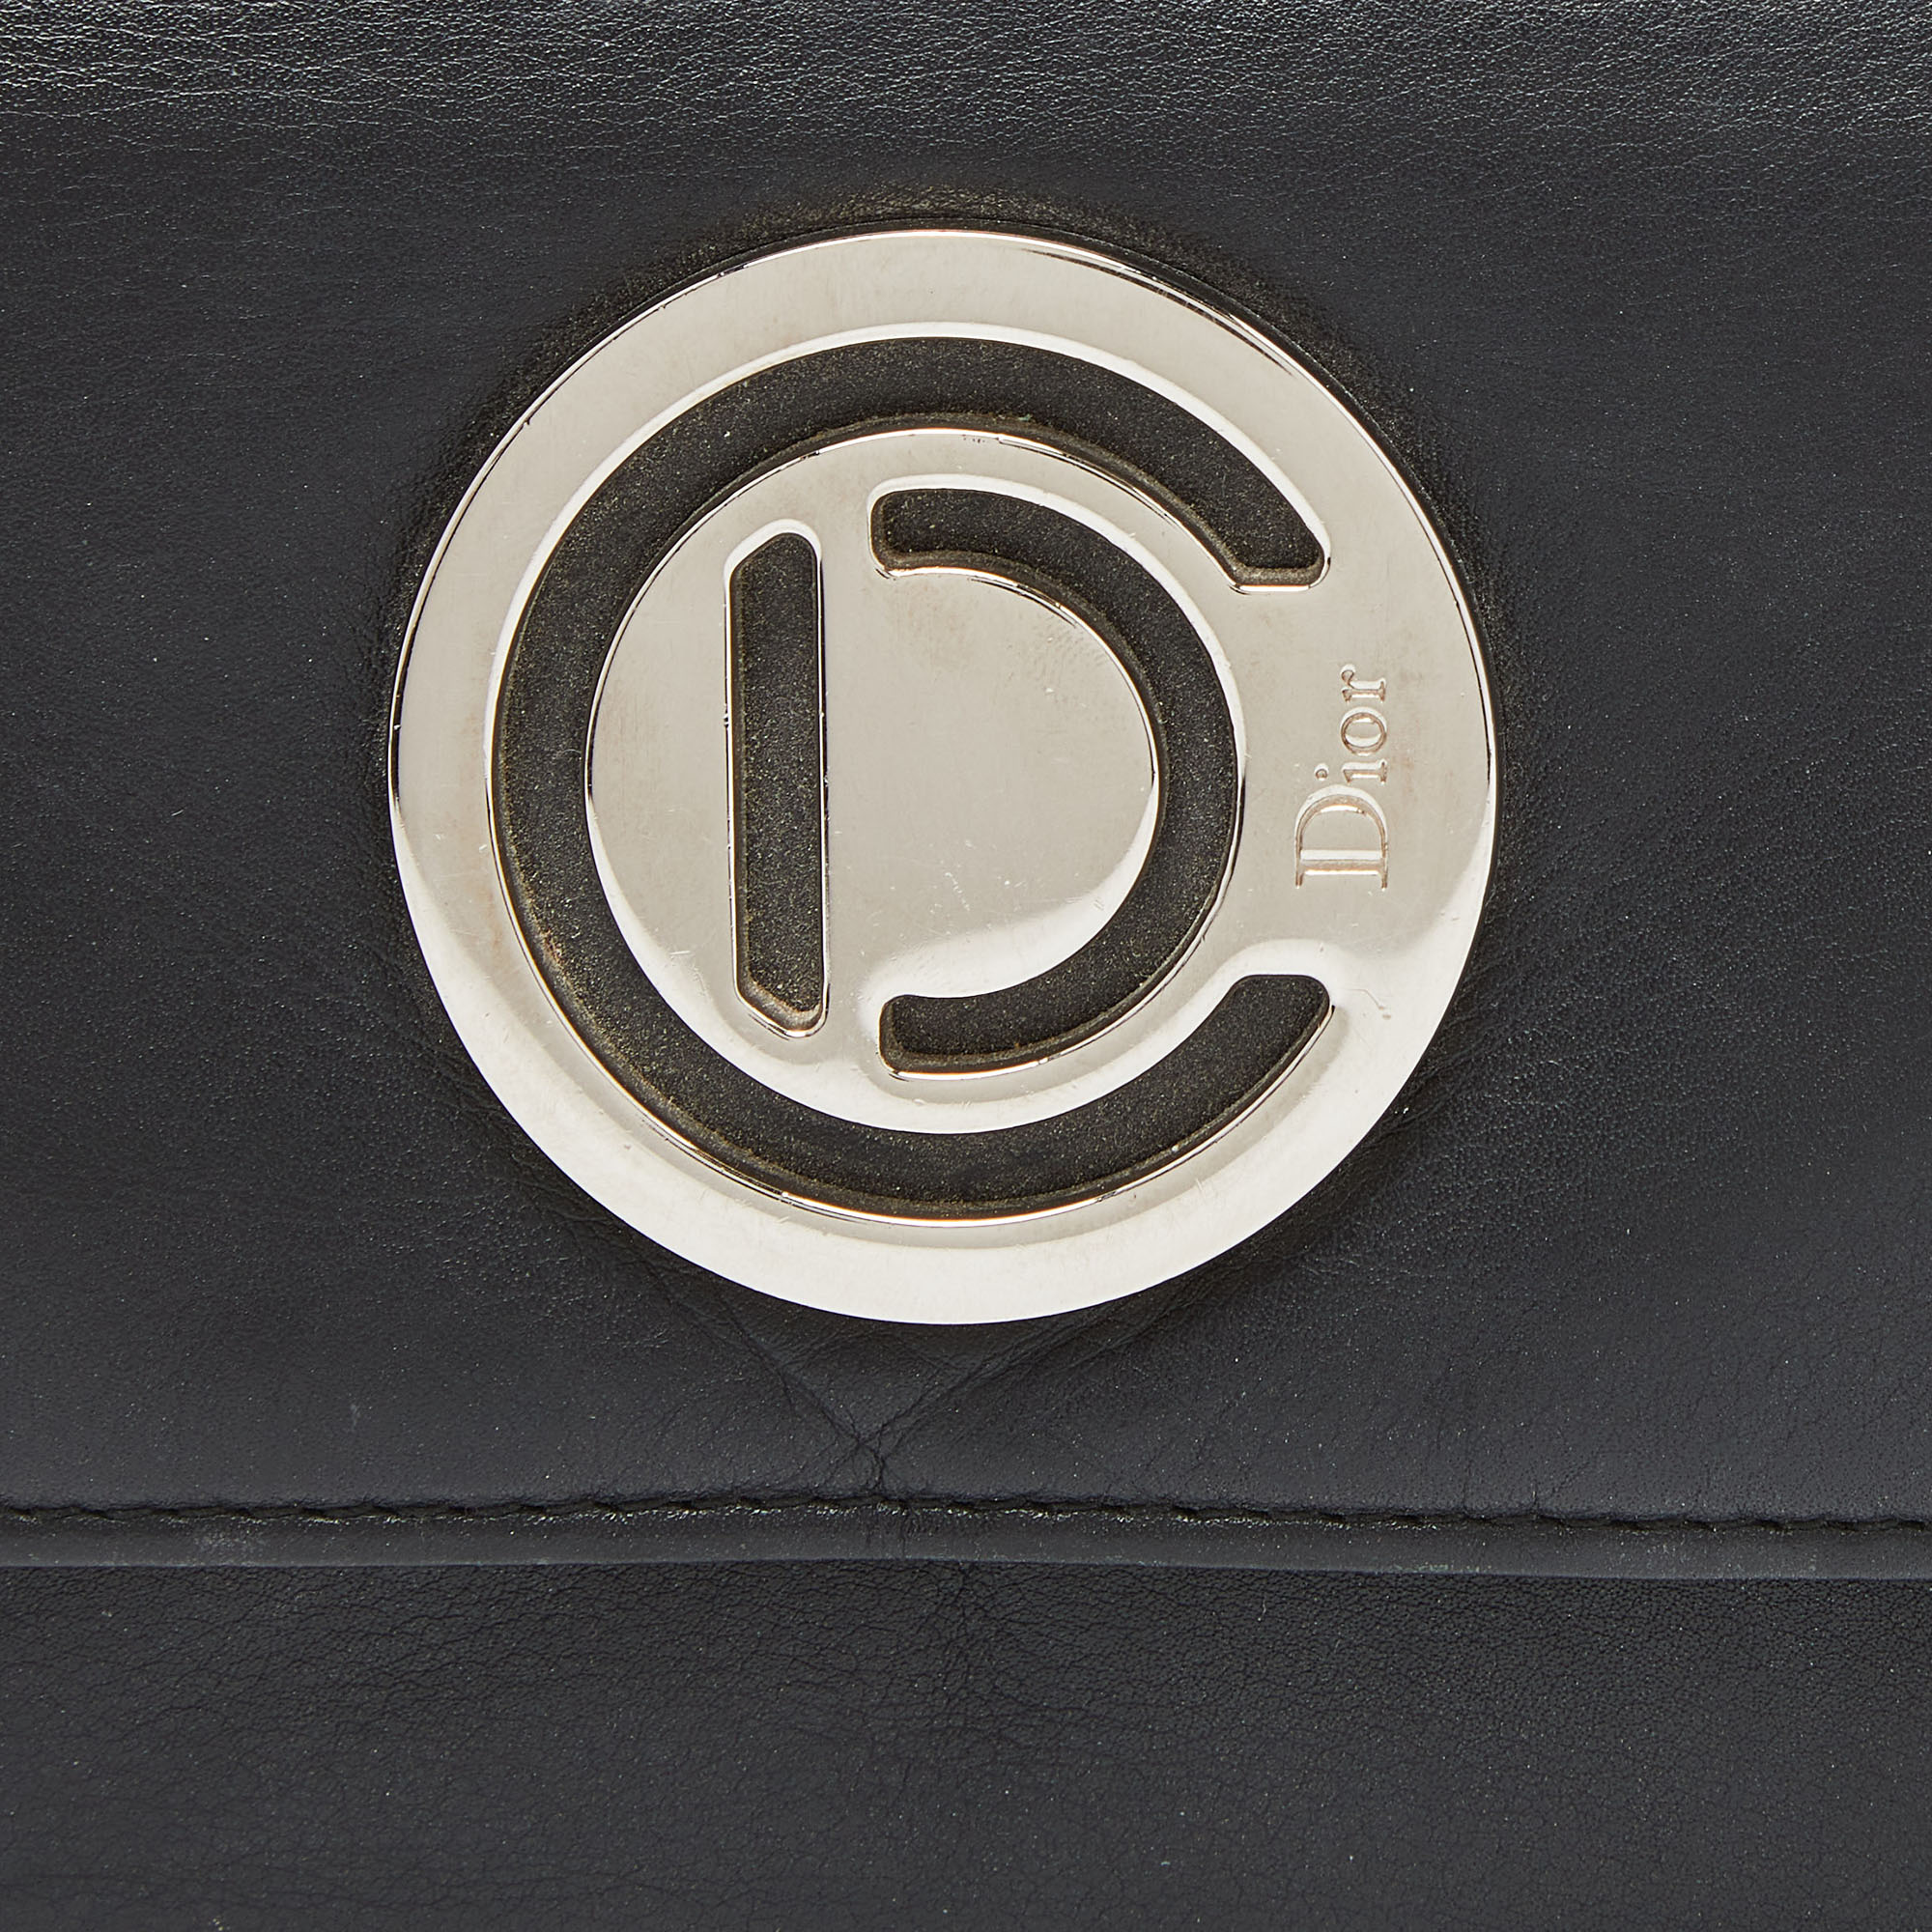 Dior Black Leather Flap Continental Wallet